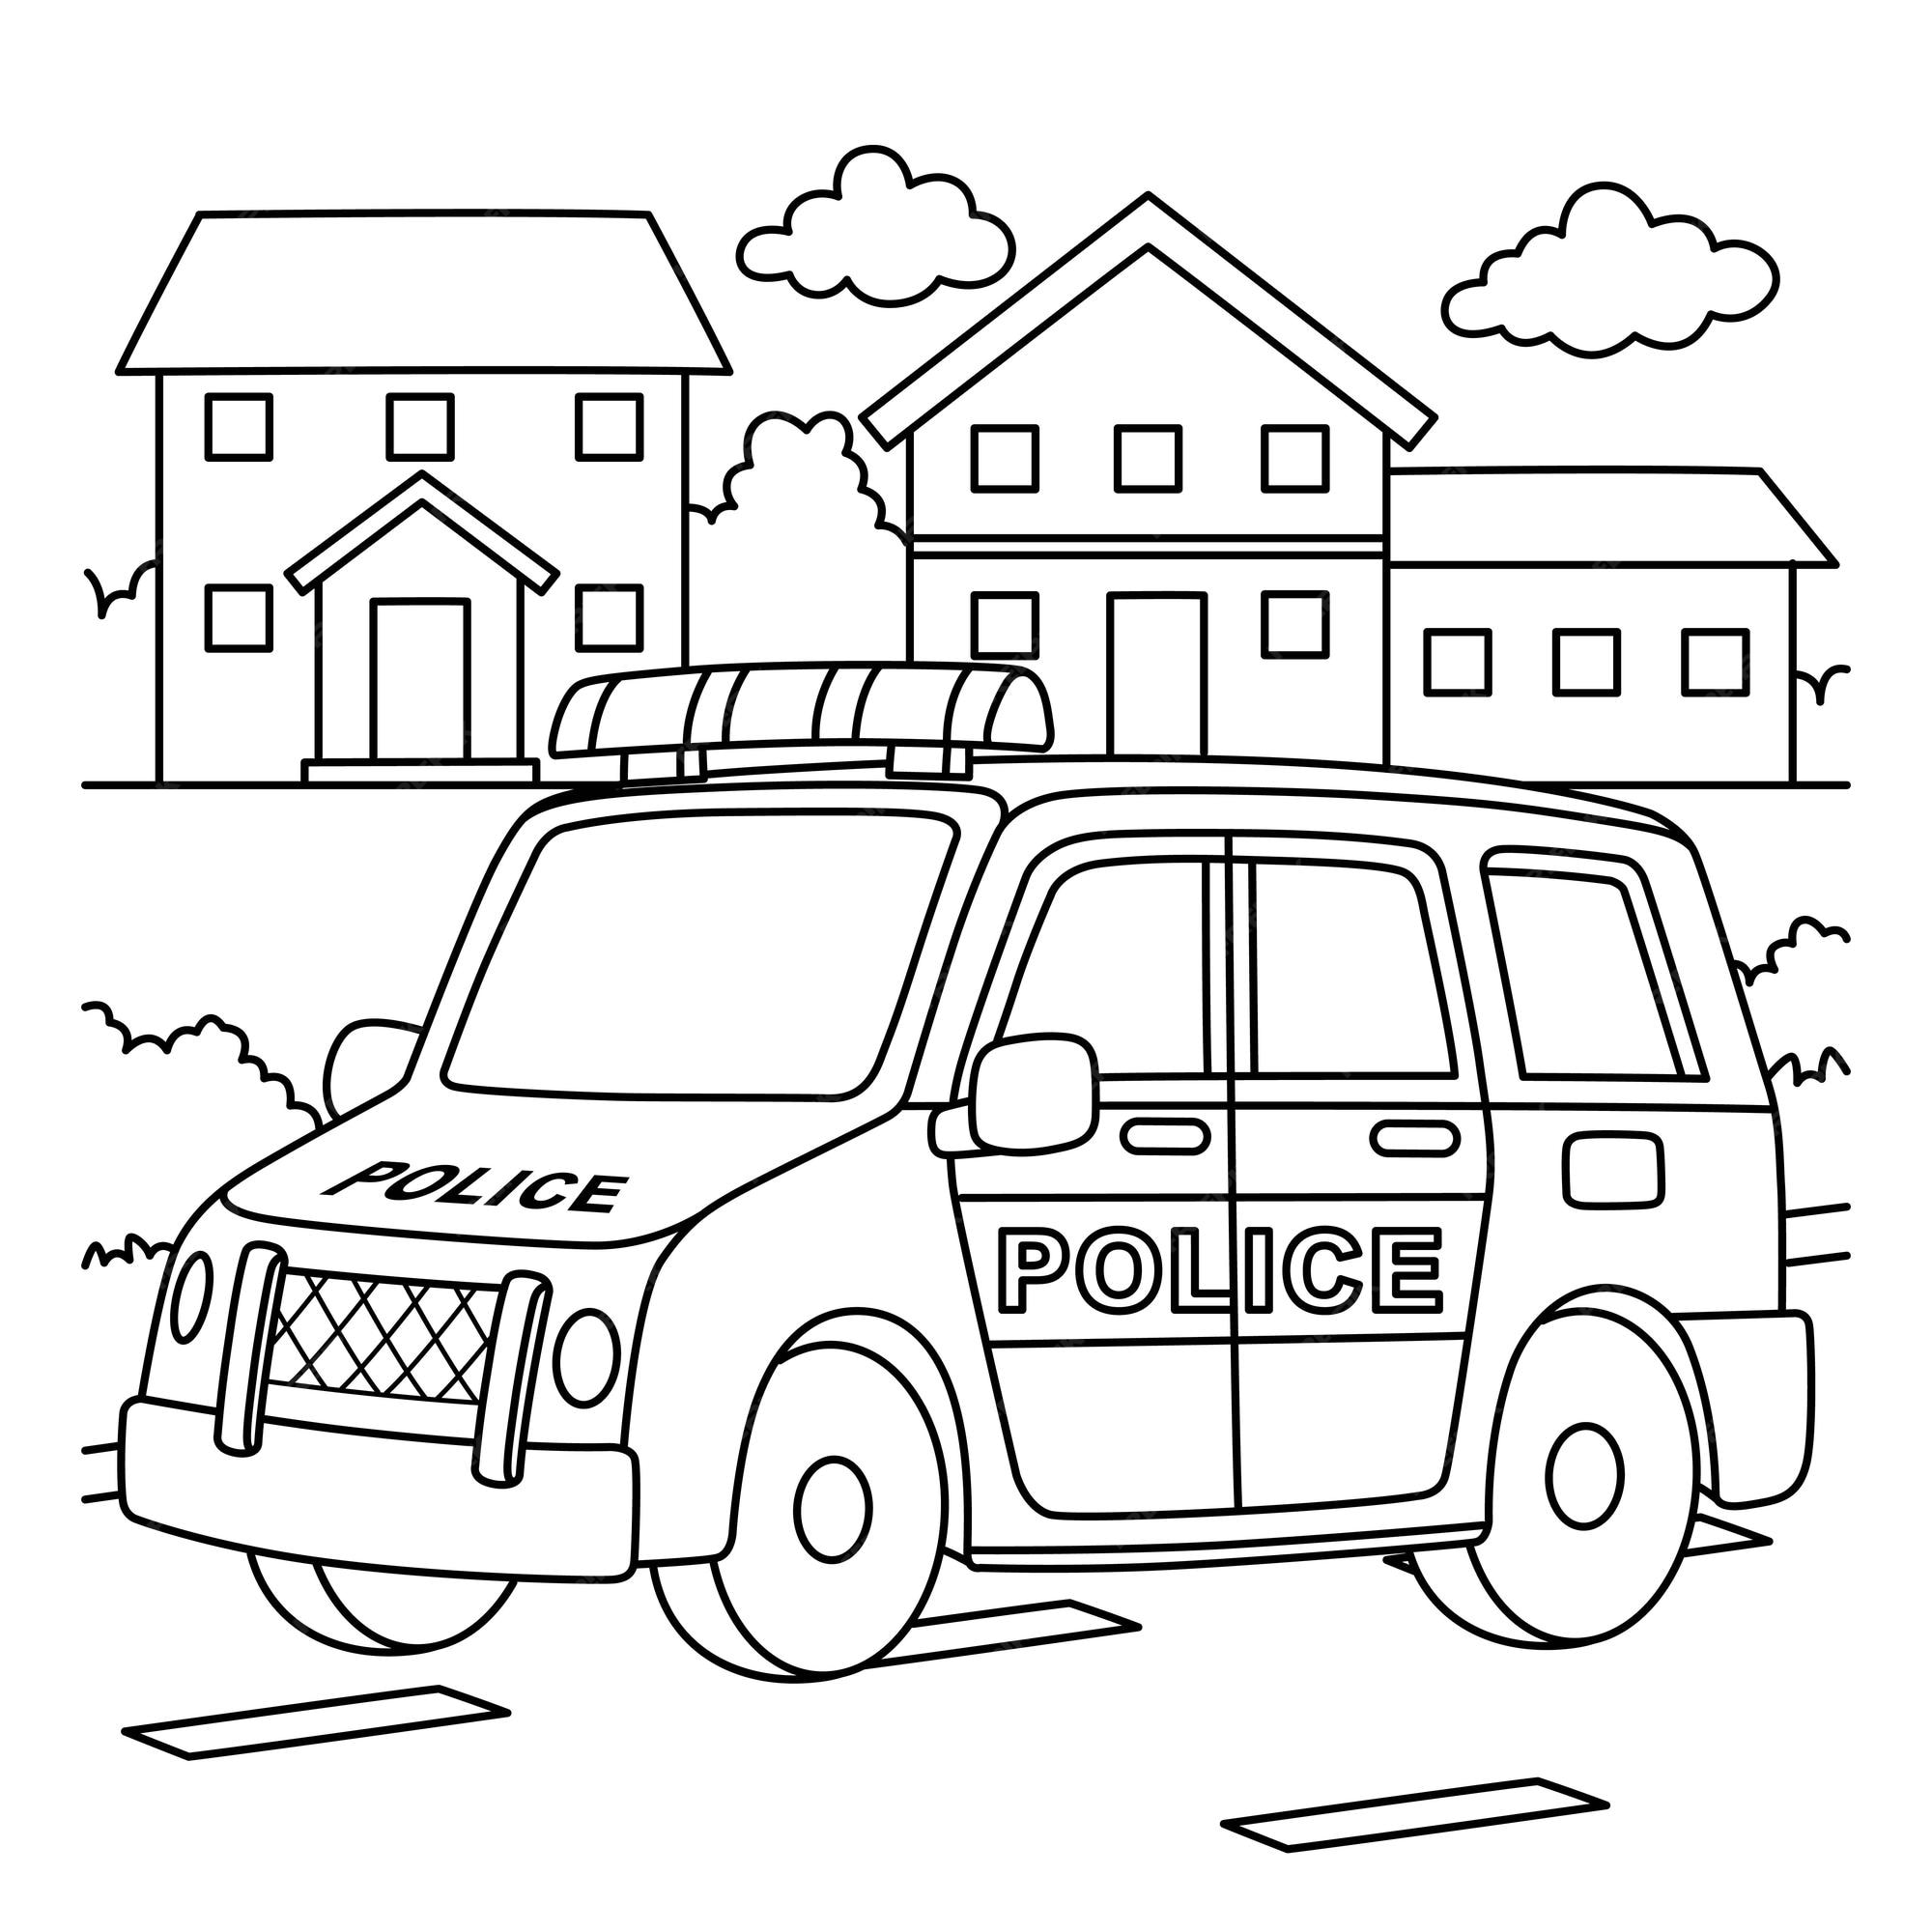 Premium vector police car coloring page for kids